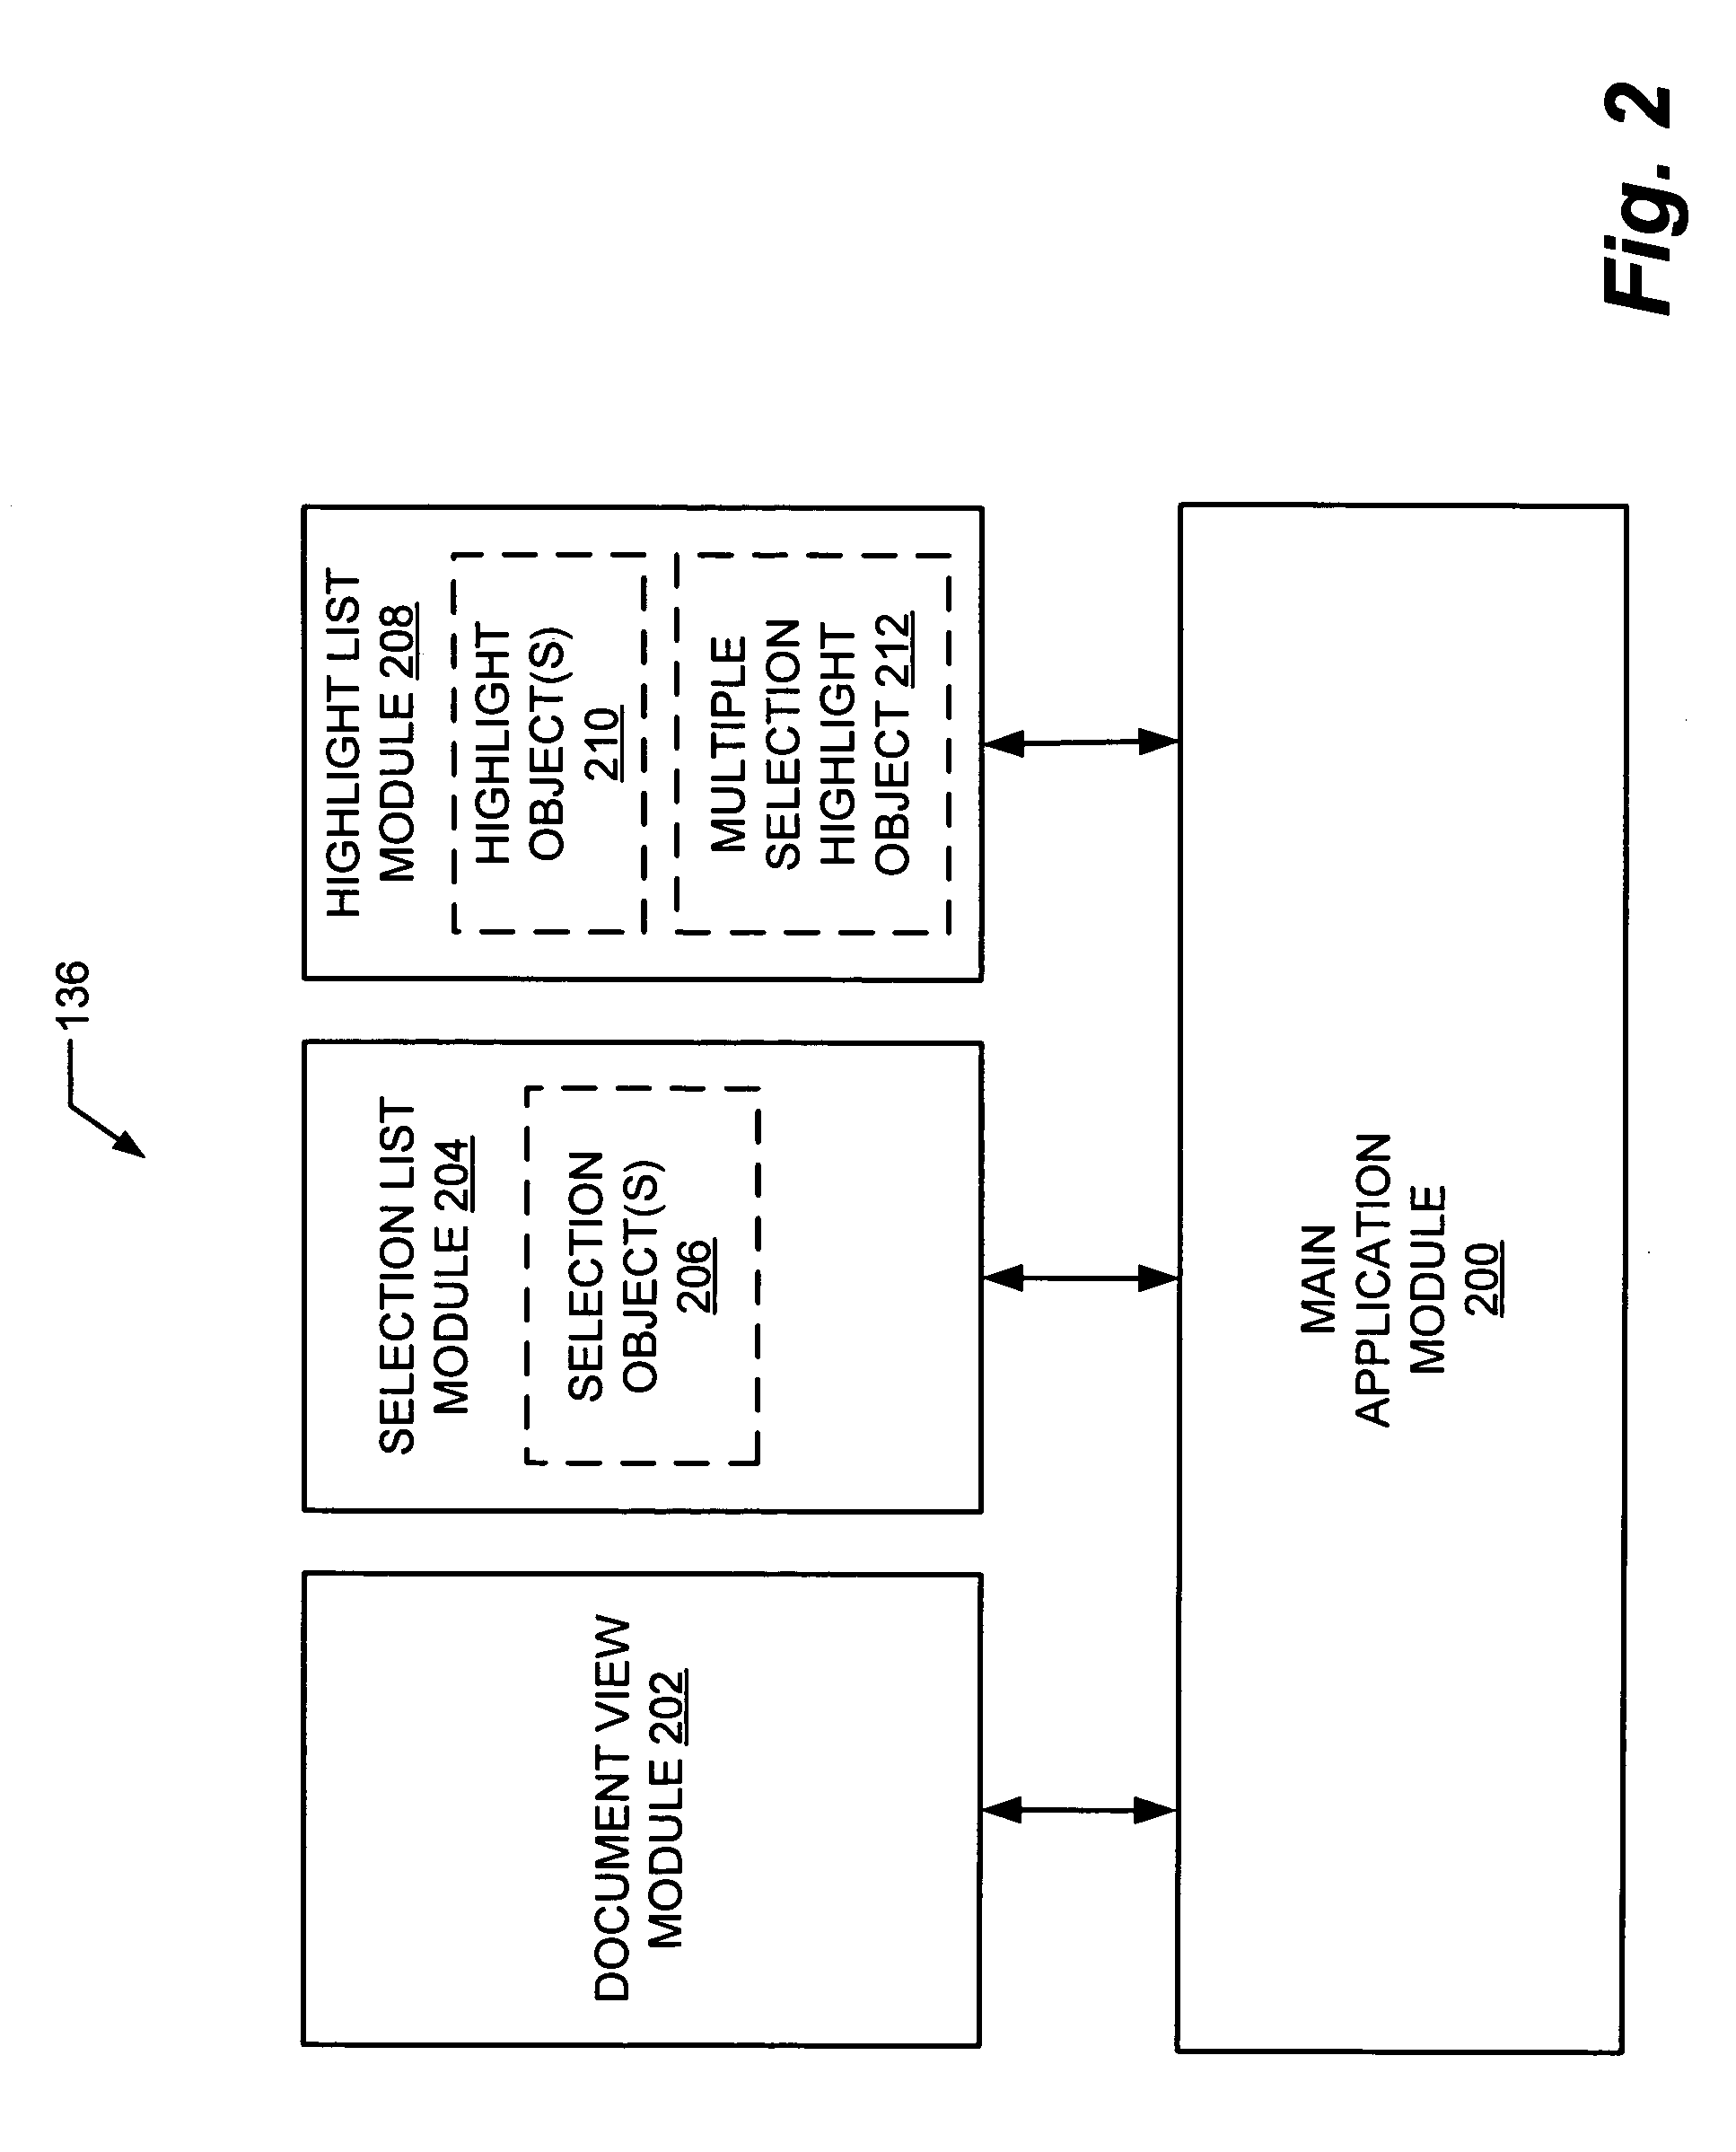 Method and system for selecting and manipulating multiple objects